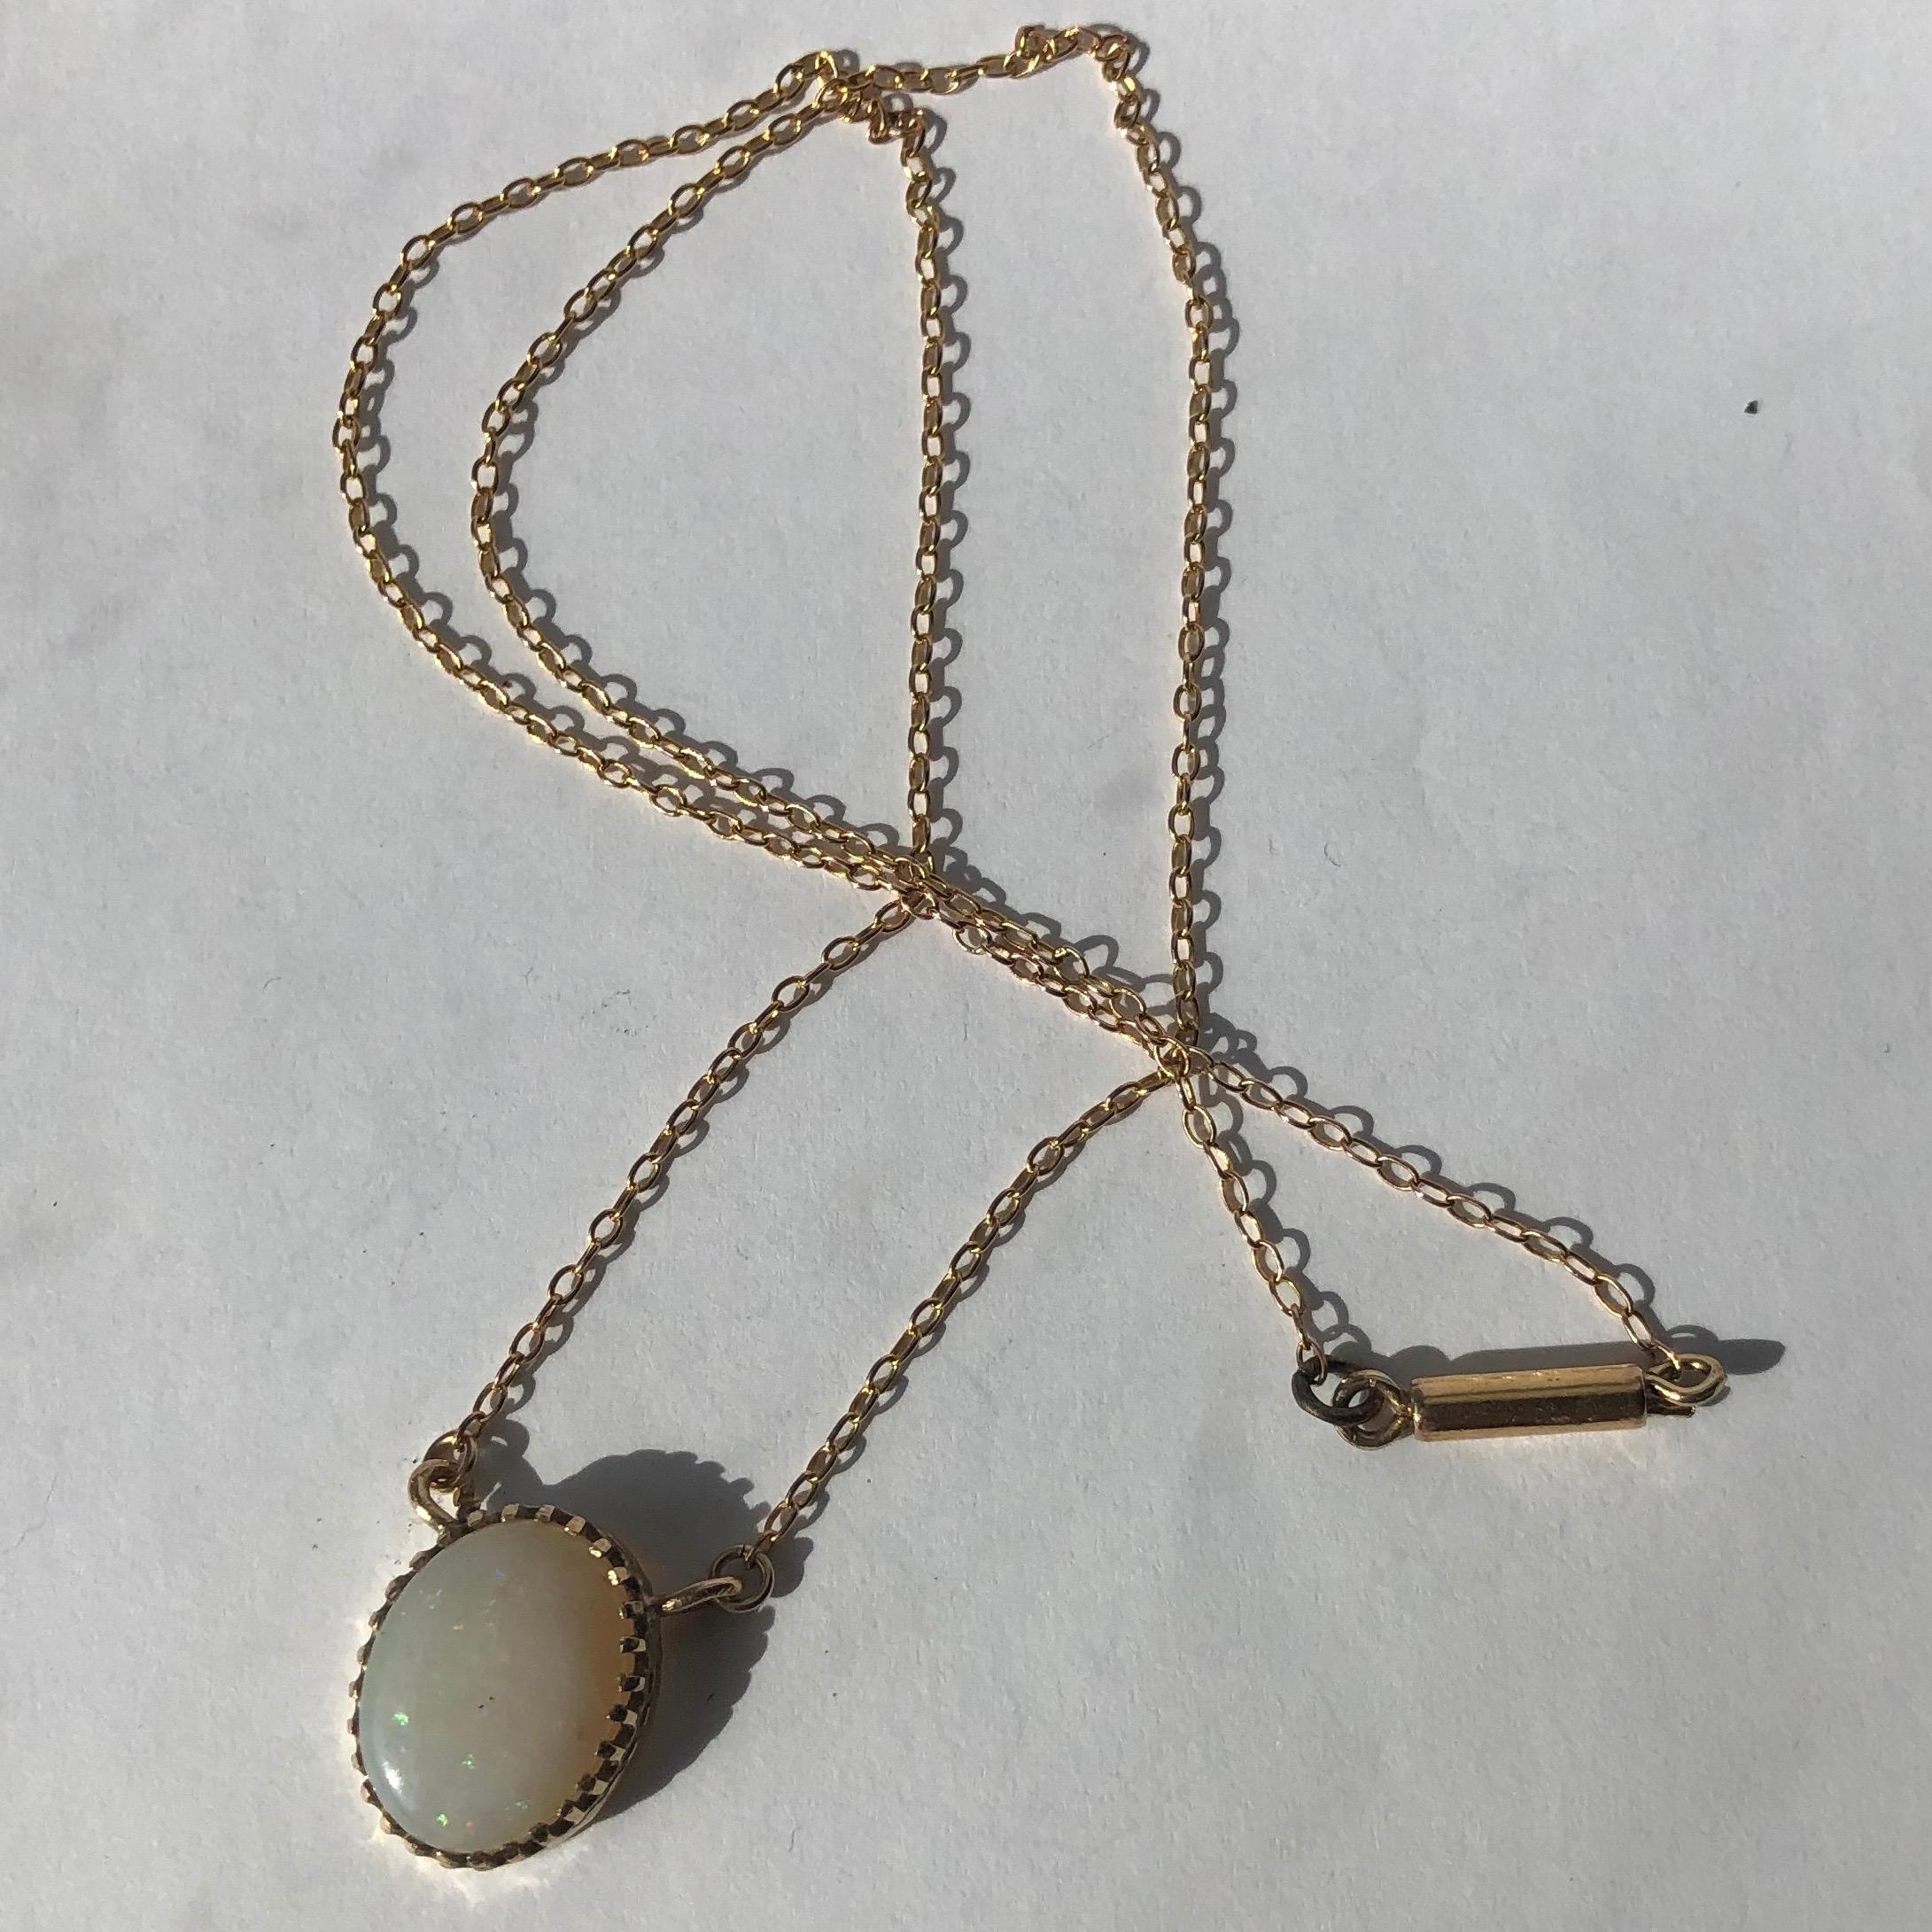 A simply stunning Art Deco pendant necklace. The pendant boasts a great sized opal held in a simple claw setting. 

Chain length: 39.5cm
Opal Dimensions: 14x10mm

Weight: 2.7g